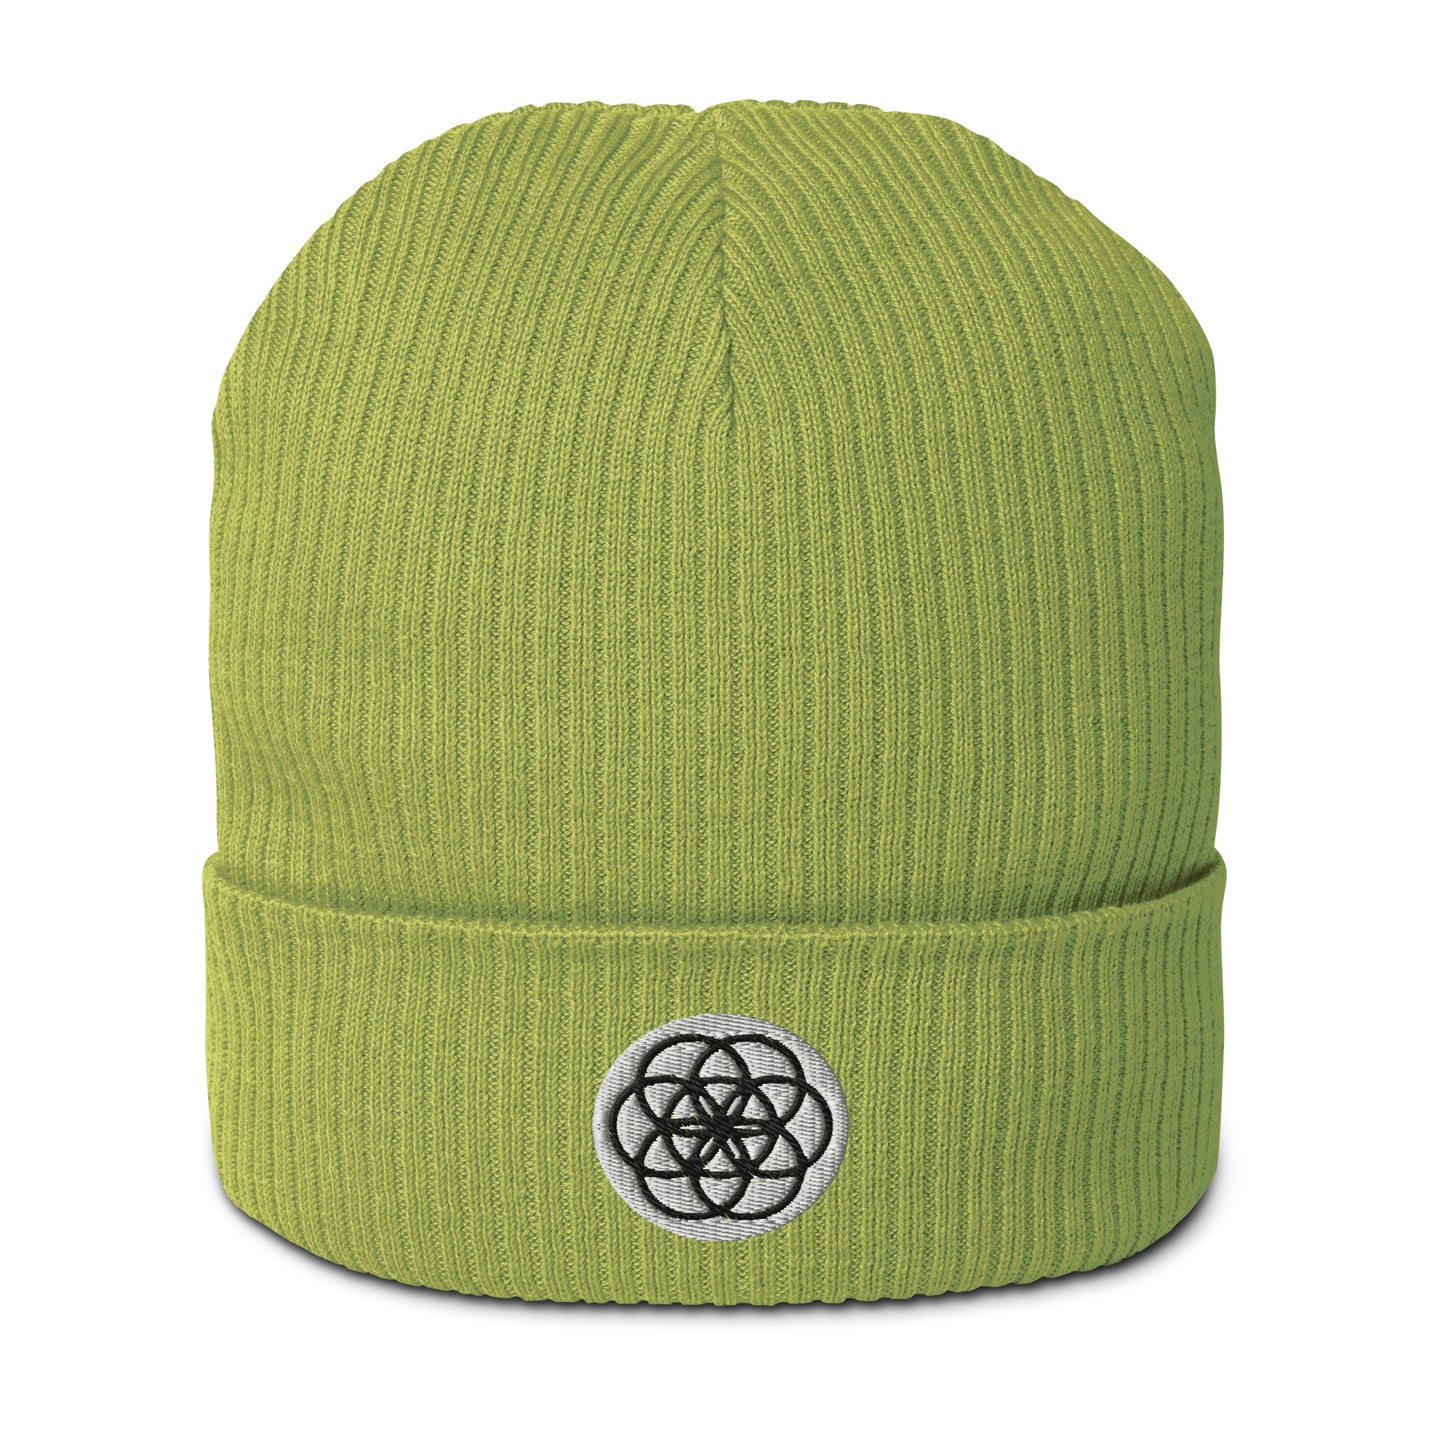 The Seed of Life beanie in Apple Green is made from 100% organic cotton and it’s the perfect cozy addition to your energetically elevated wardrobe. The seed of life is an ancient and meaningful sacred geometry symbol that Whether you're stargazing or navigating the urban jungle, let this beanie remind you of your place in the cosmic tapestry.